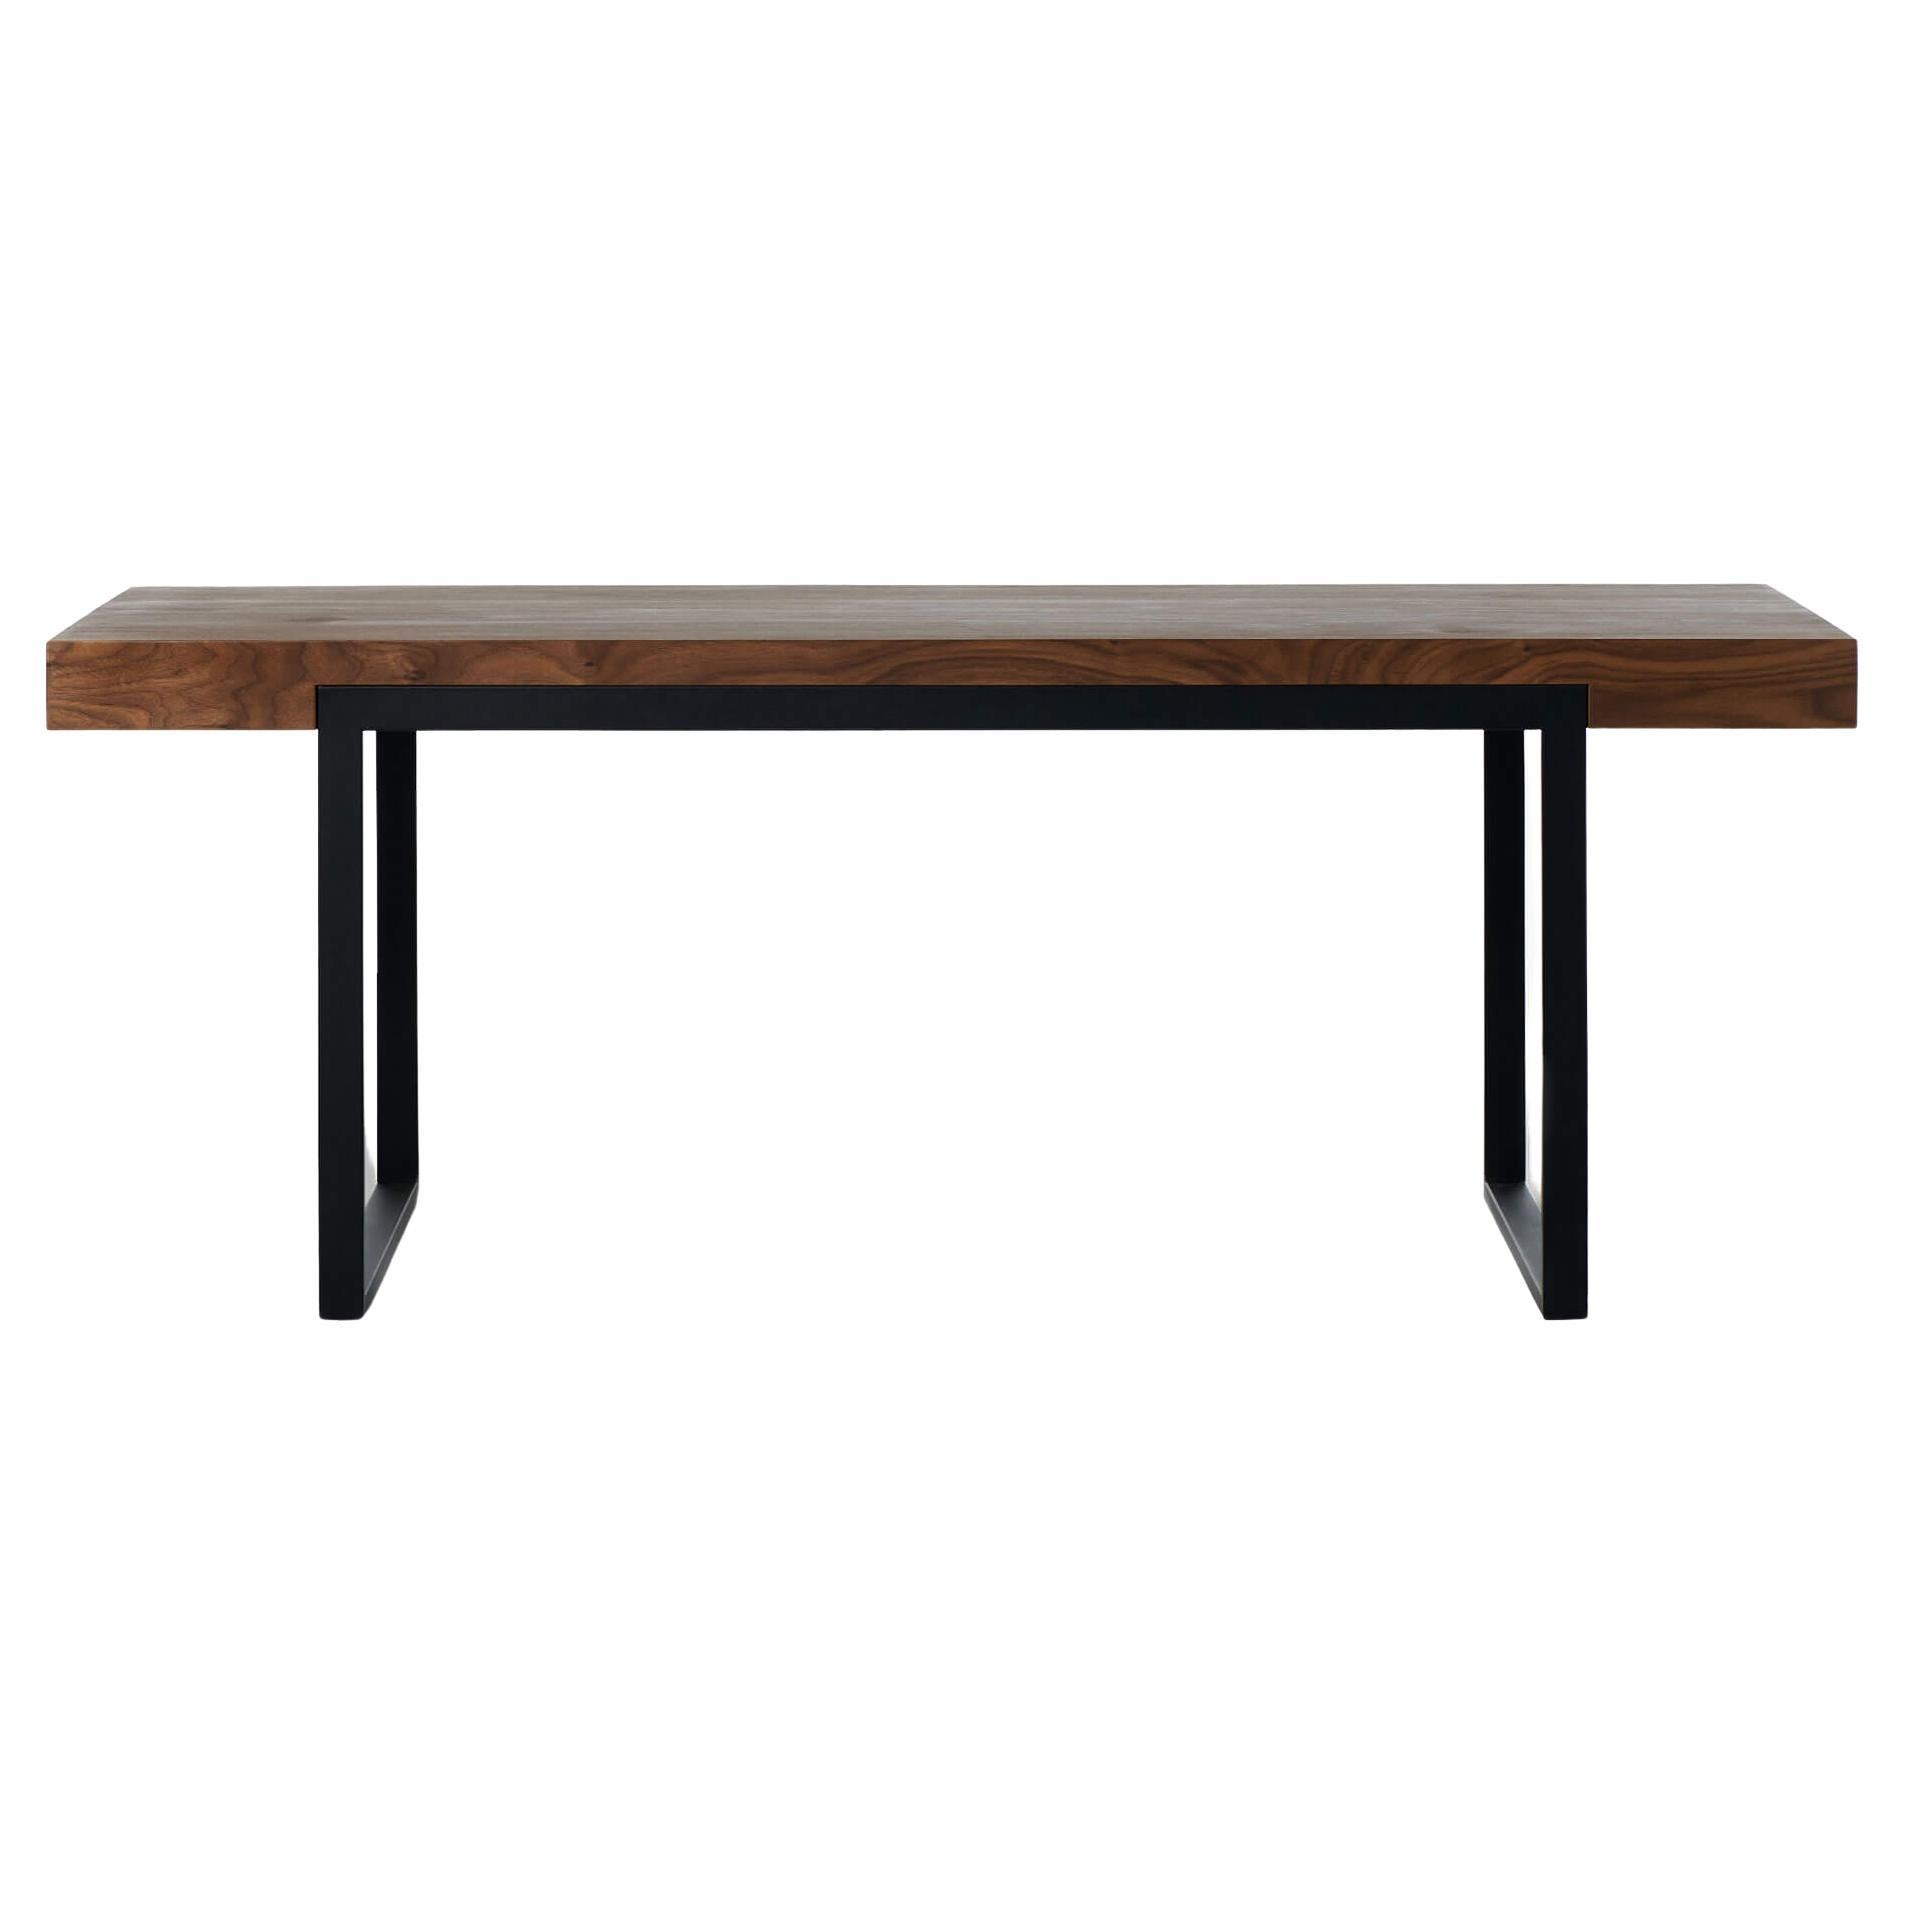 Walnut Natur Offset Dining Table M by Milla & Milli